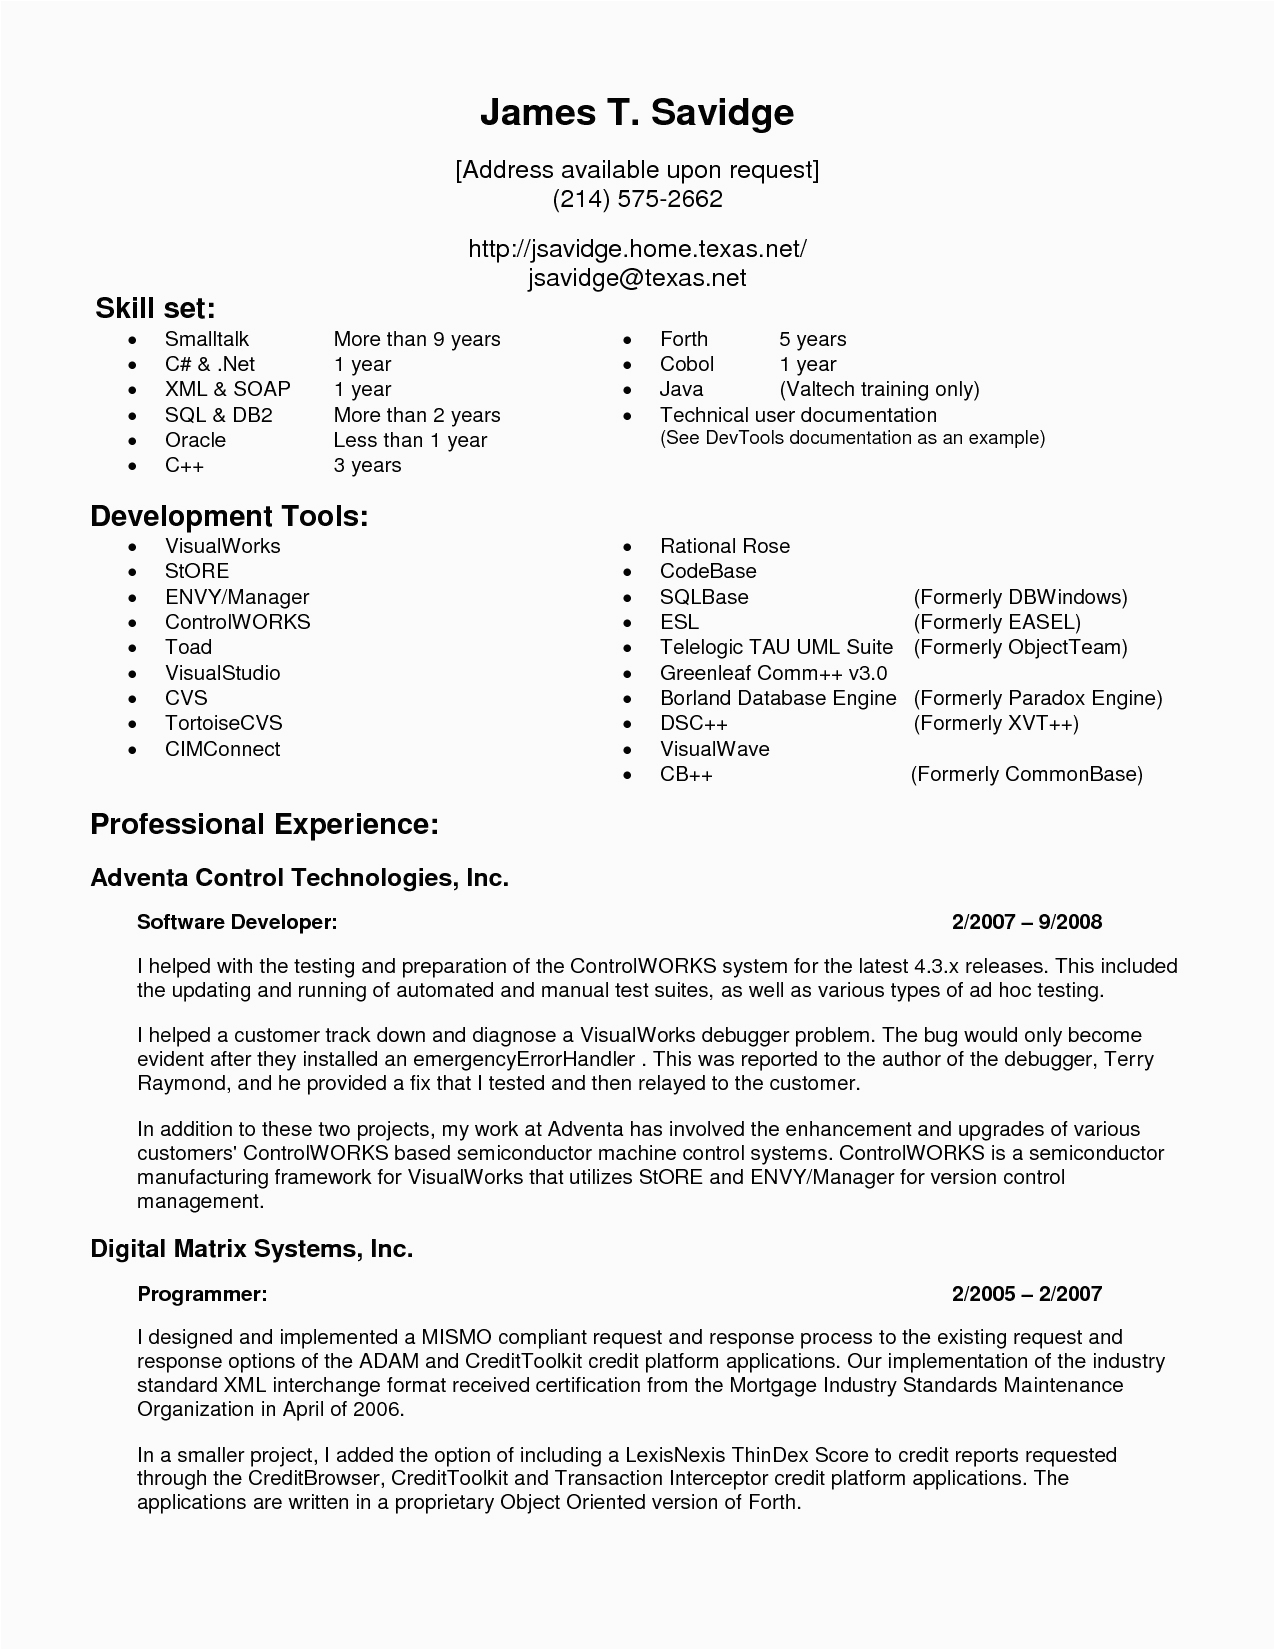 Sample Resume for 5 Years Experience 5 Years Experience Resume format Resume Templates